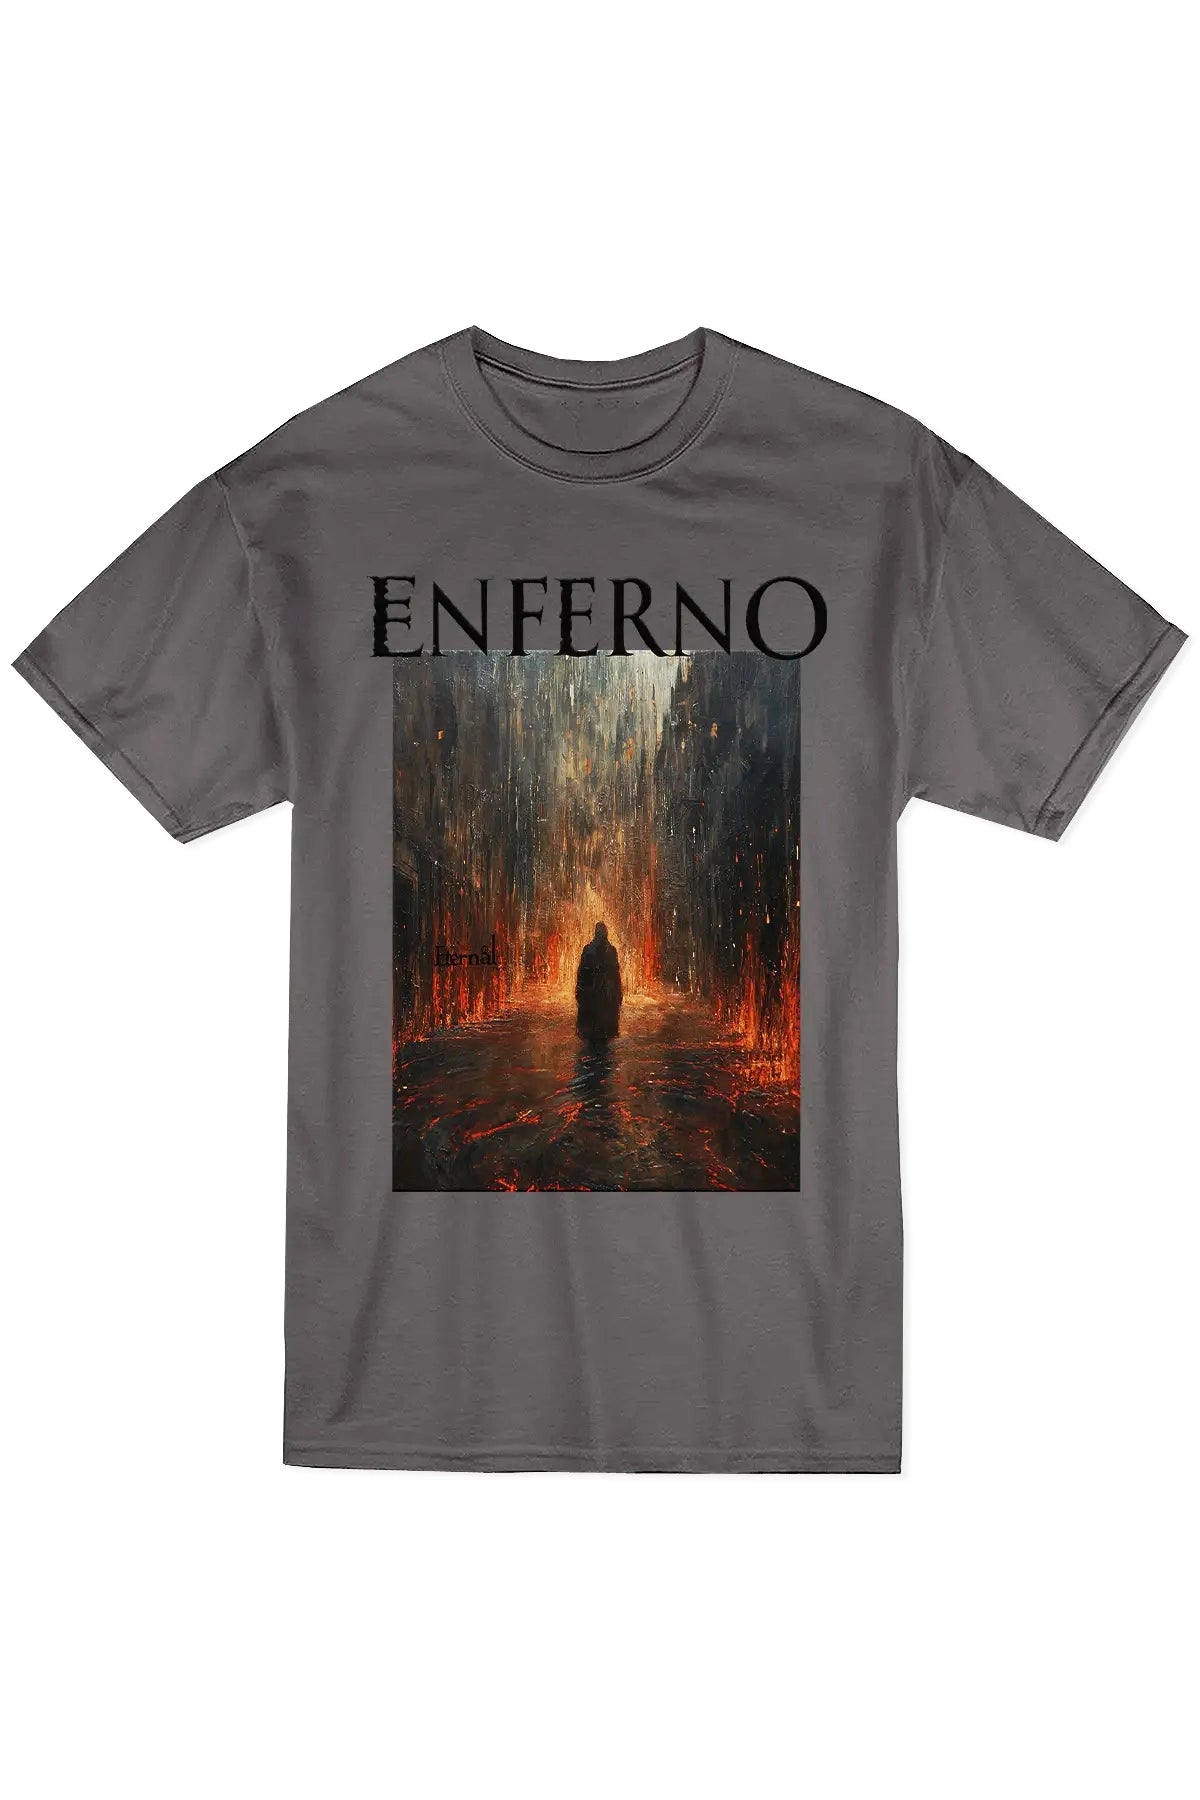 Enter the Enferno Tee in Pepper.